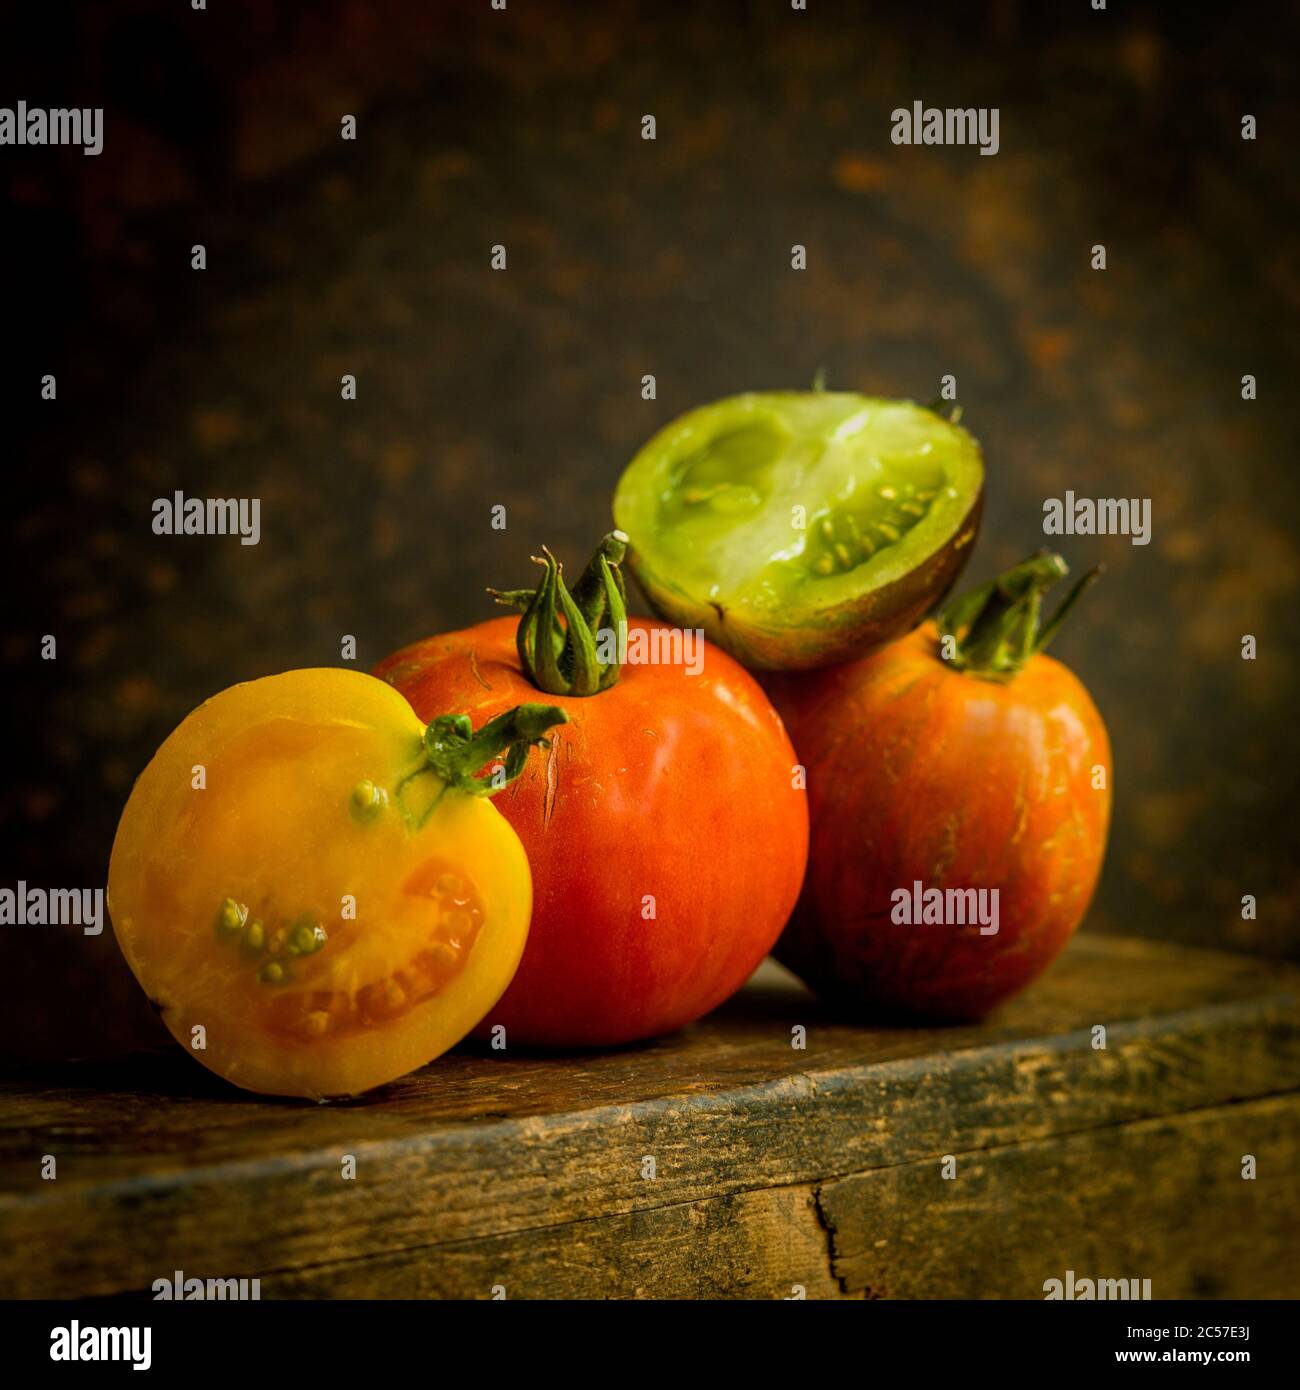 Closeup shot of a variety of tomatoes on a brown background Stock Photo